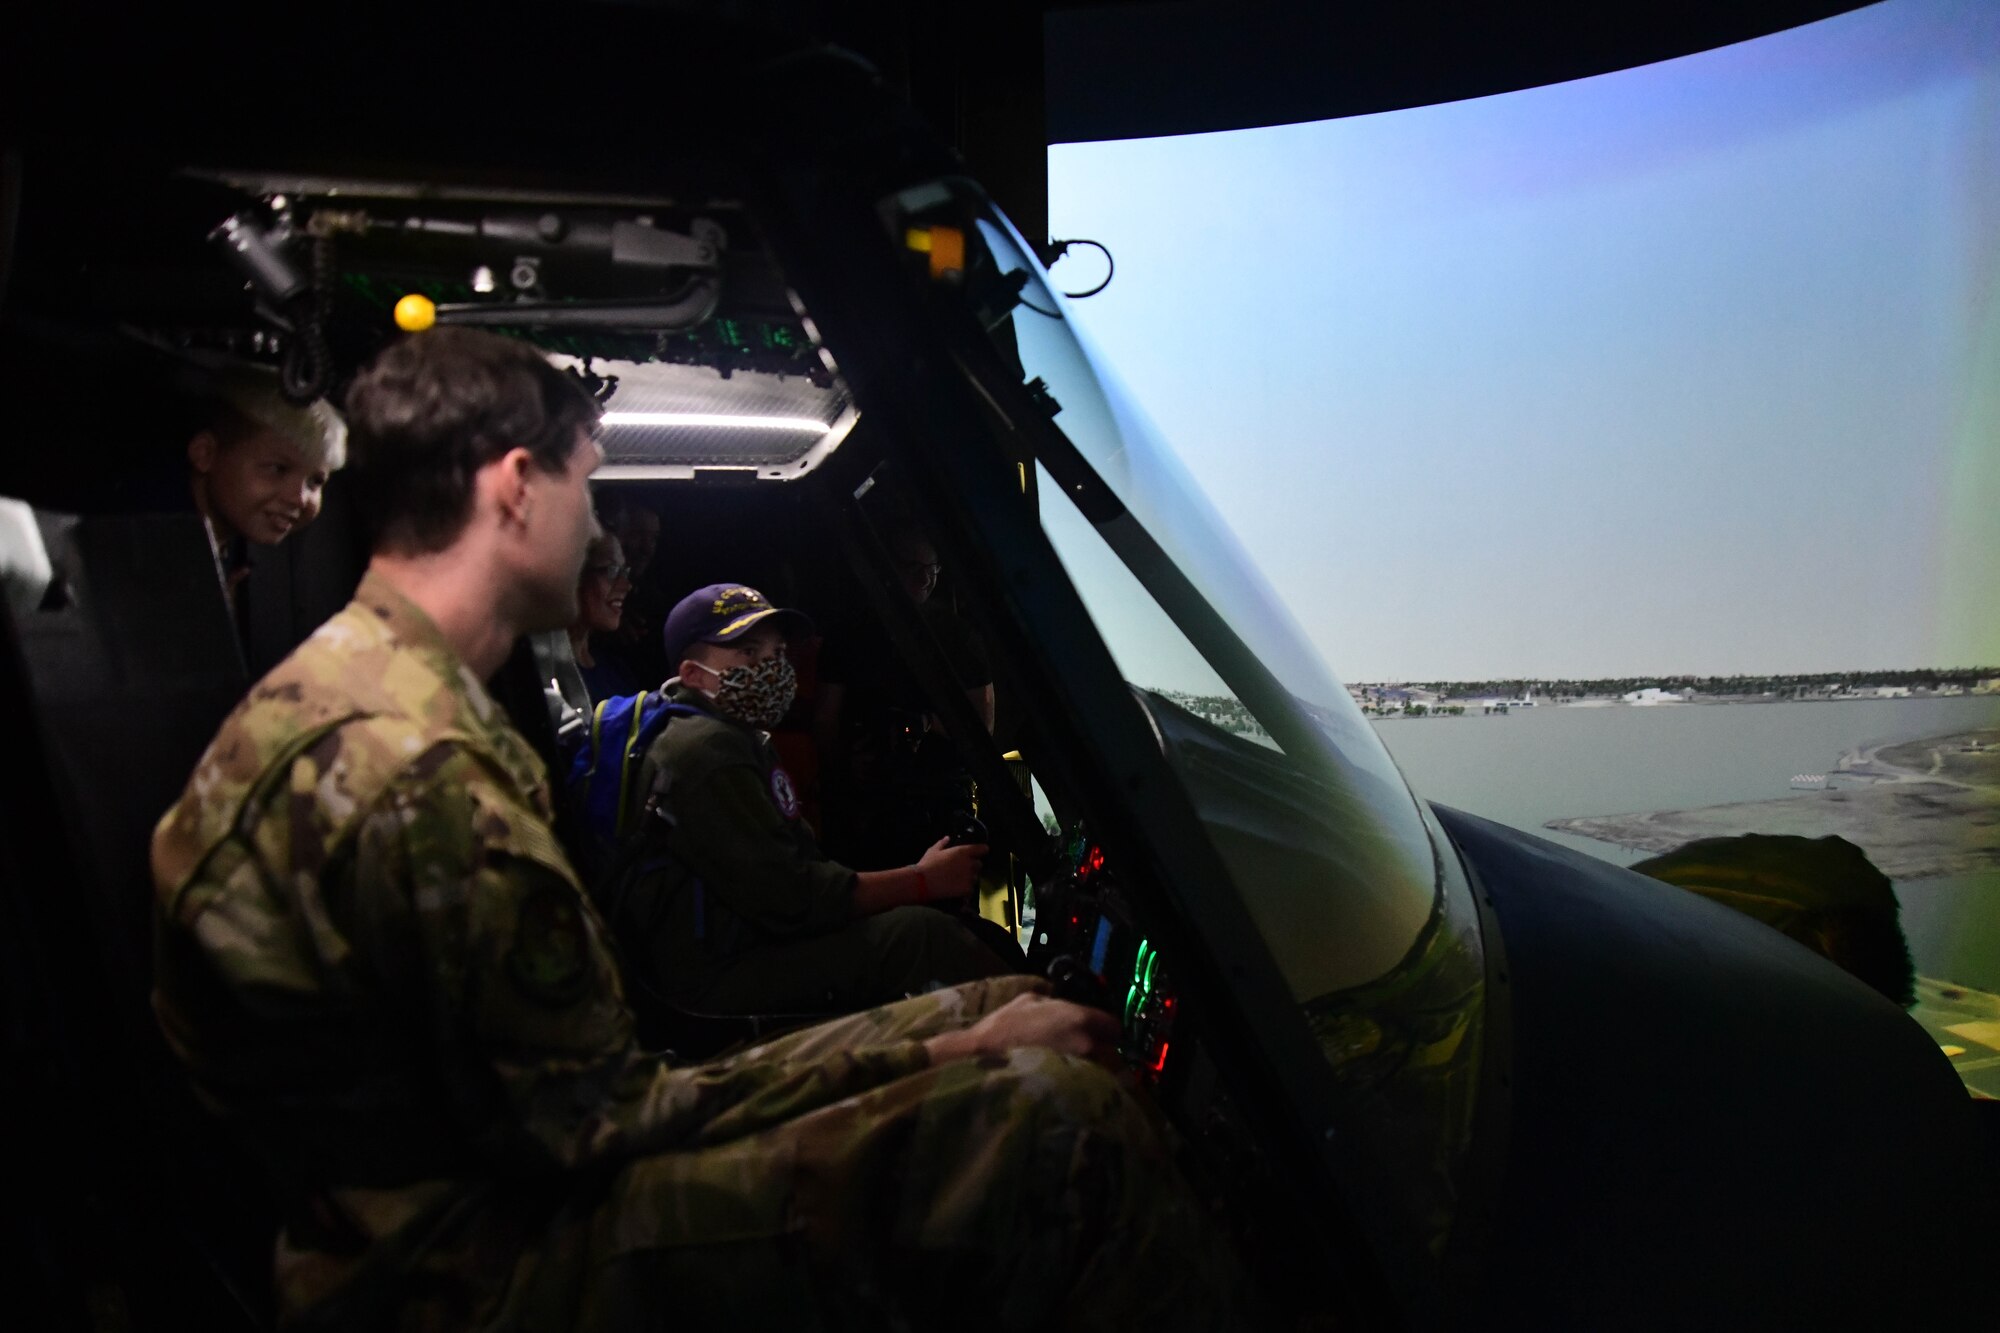 O’Rian Jolley, The Check-6 Foundation pilot for a day, flies a UH-1 simulator at the 1st Helicopter Squadron on Joint Base Andrews, June 26, 2019. O’Rian is the 27th Pilot for a Day at JBA. When he isn’t working to reach his goal of being a US Coast Guard rescue swimmer by routinely swimming and learning about the career, he raises money for research and awareness of mitochondrial diseases. He does this by creating and selling paracord ‘Hope Bracelets’ and giving them out for donations to his cause. He has so far raised over $1,000 for Children’s National Medical Center in Washington, DC. (U.S. Air National Guard photo by Erica Flores)